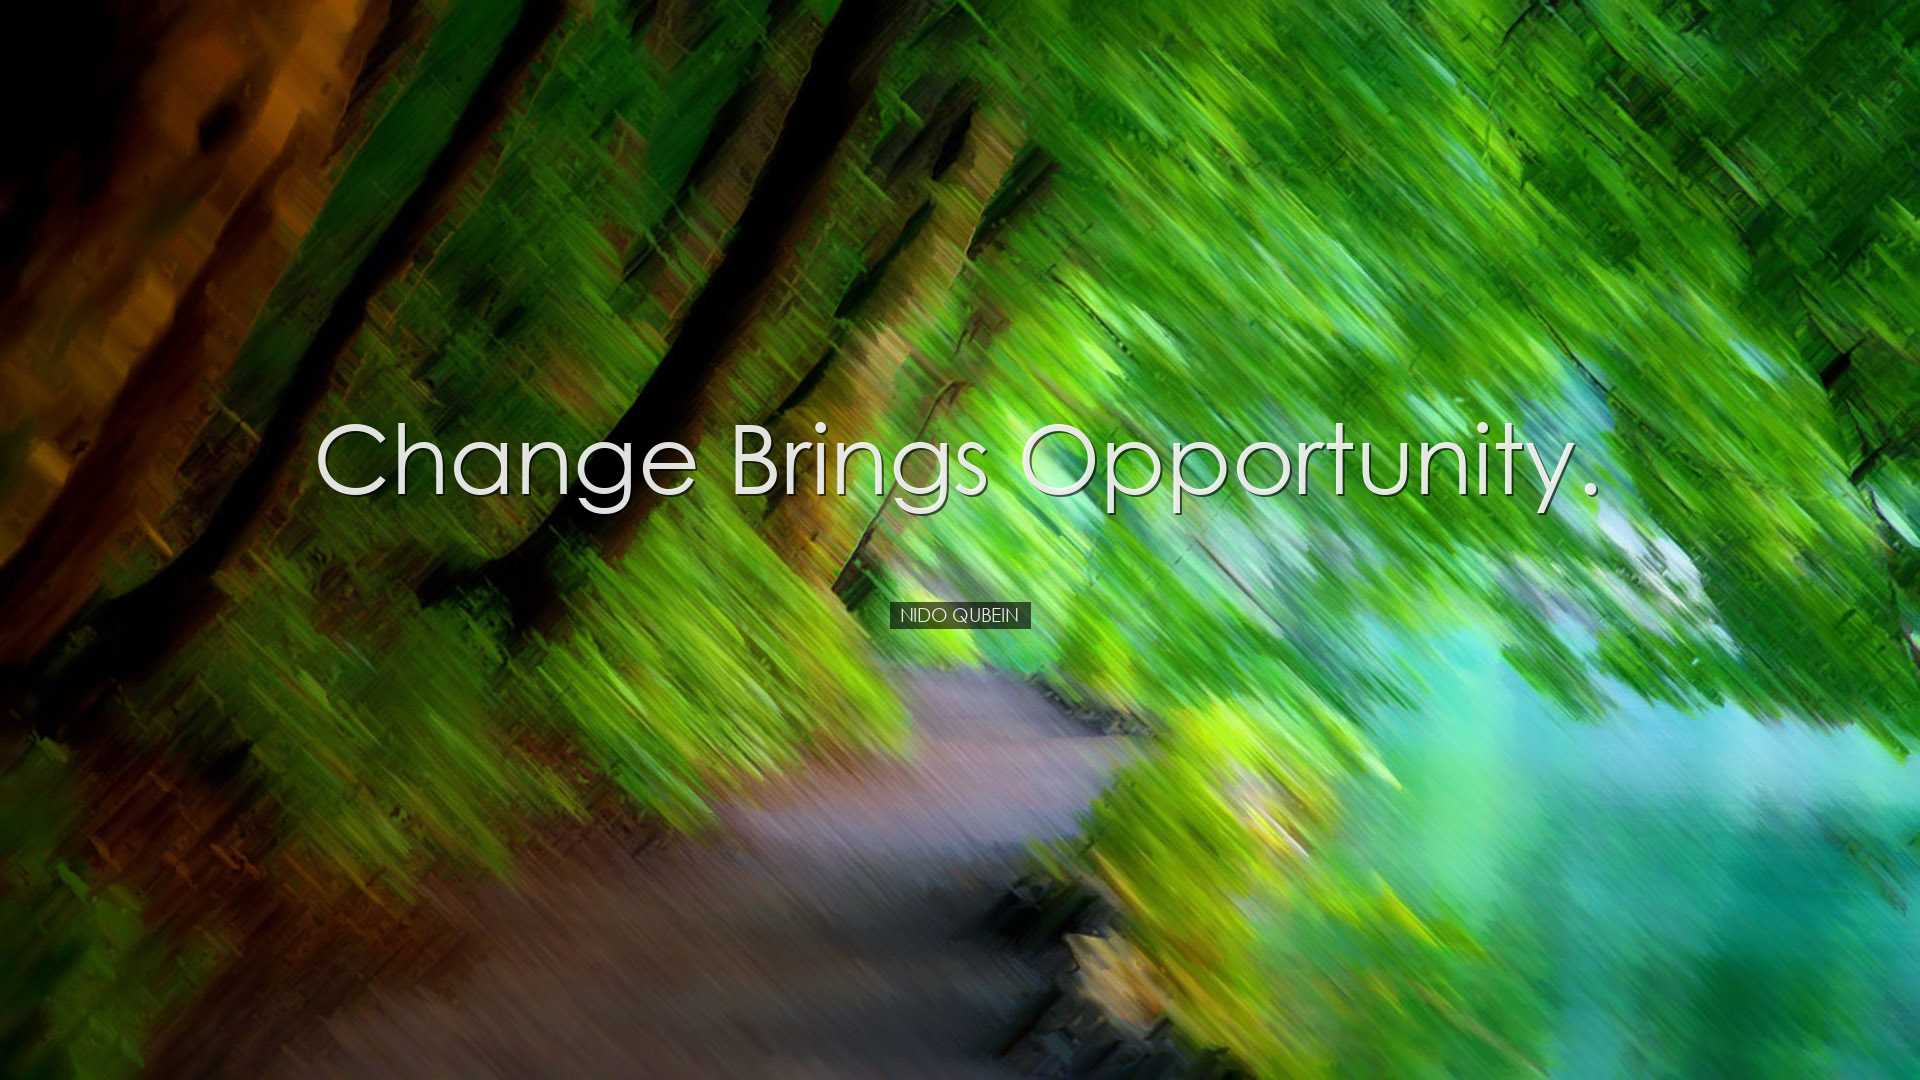 Change brings opportunity. - Nido Qubein